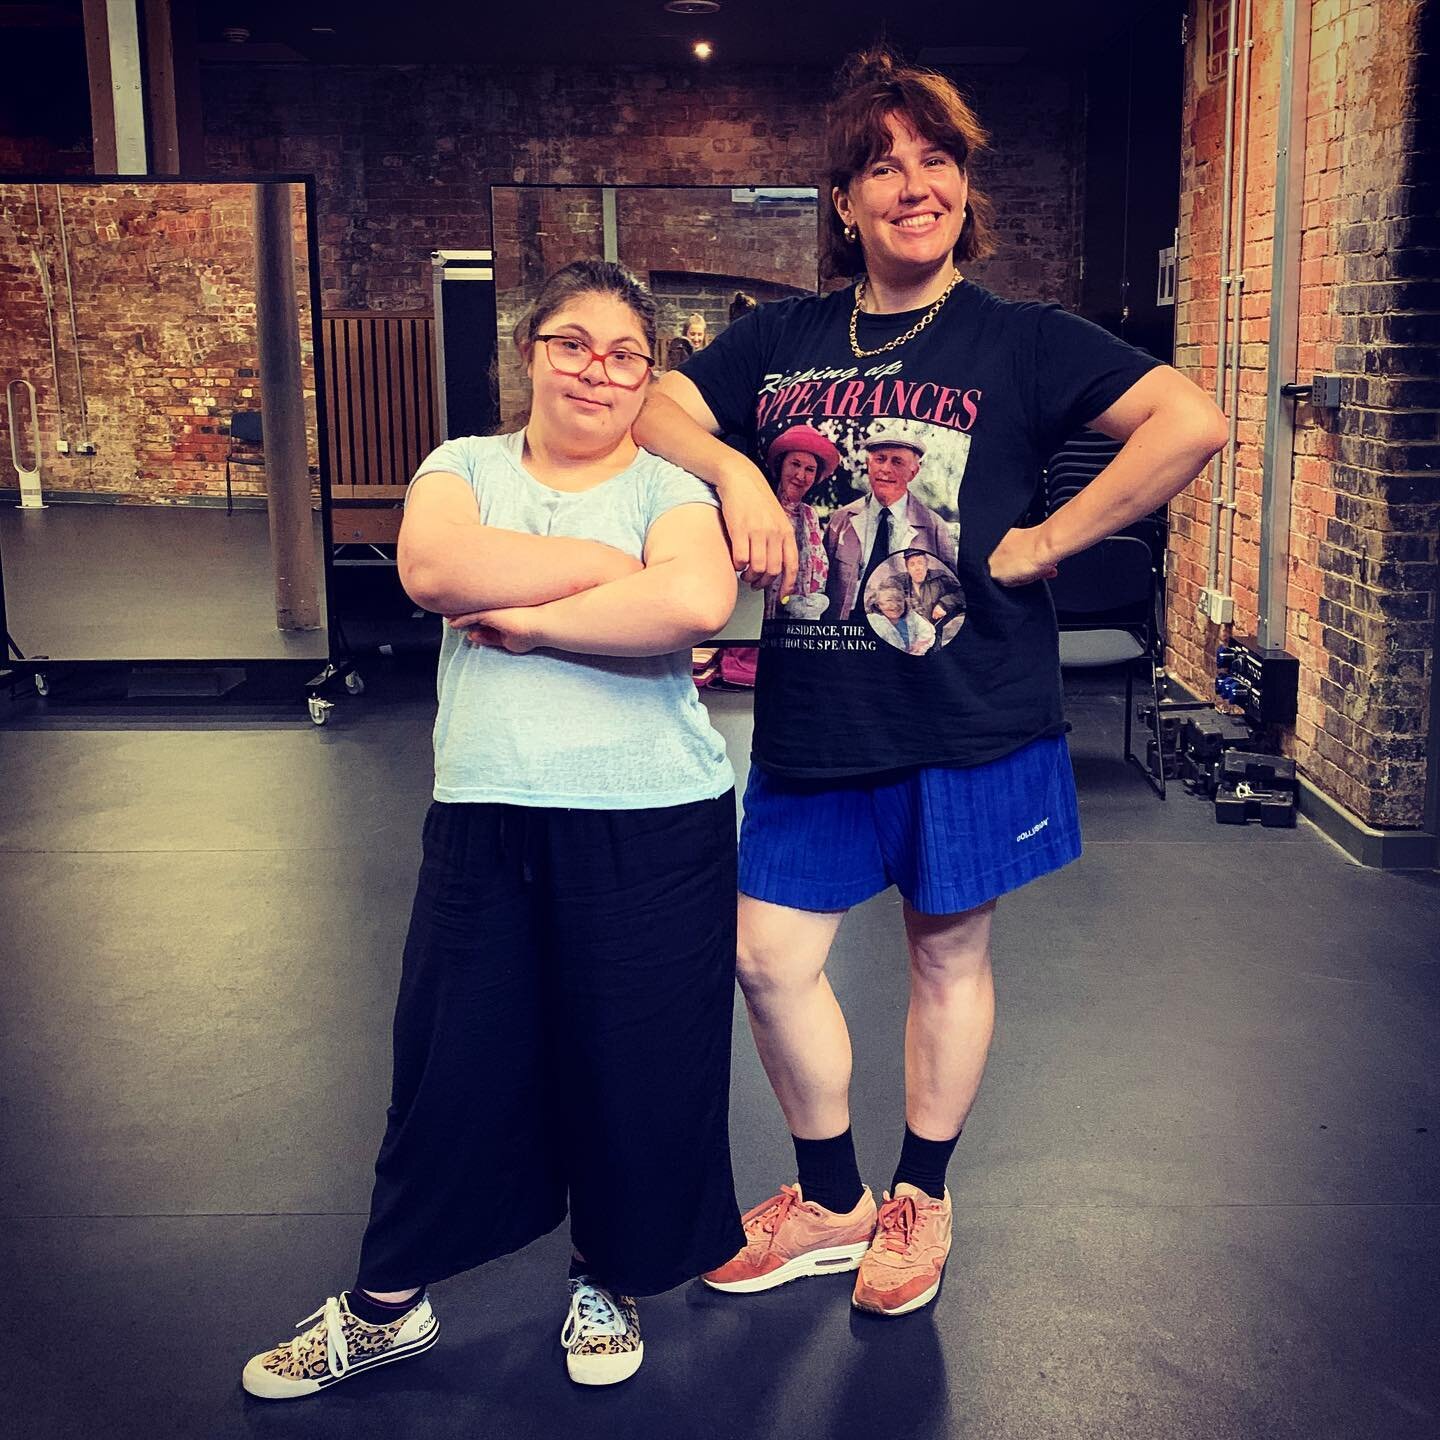 #DreamTeam
- the wonderful Ophir Yaron &amp; Sarah Blanc co-leading B A MOVER &amp; A SHAKER - a 4-day inclusive dance project this week at Platform 

B bold B seen B heard B part of B Creative

B Creative is an All Change arts activism project creat